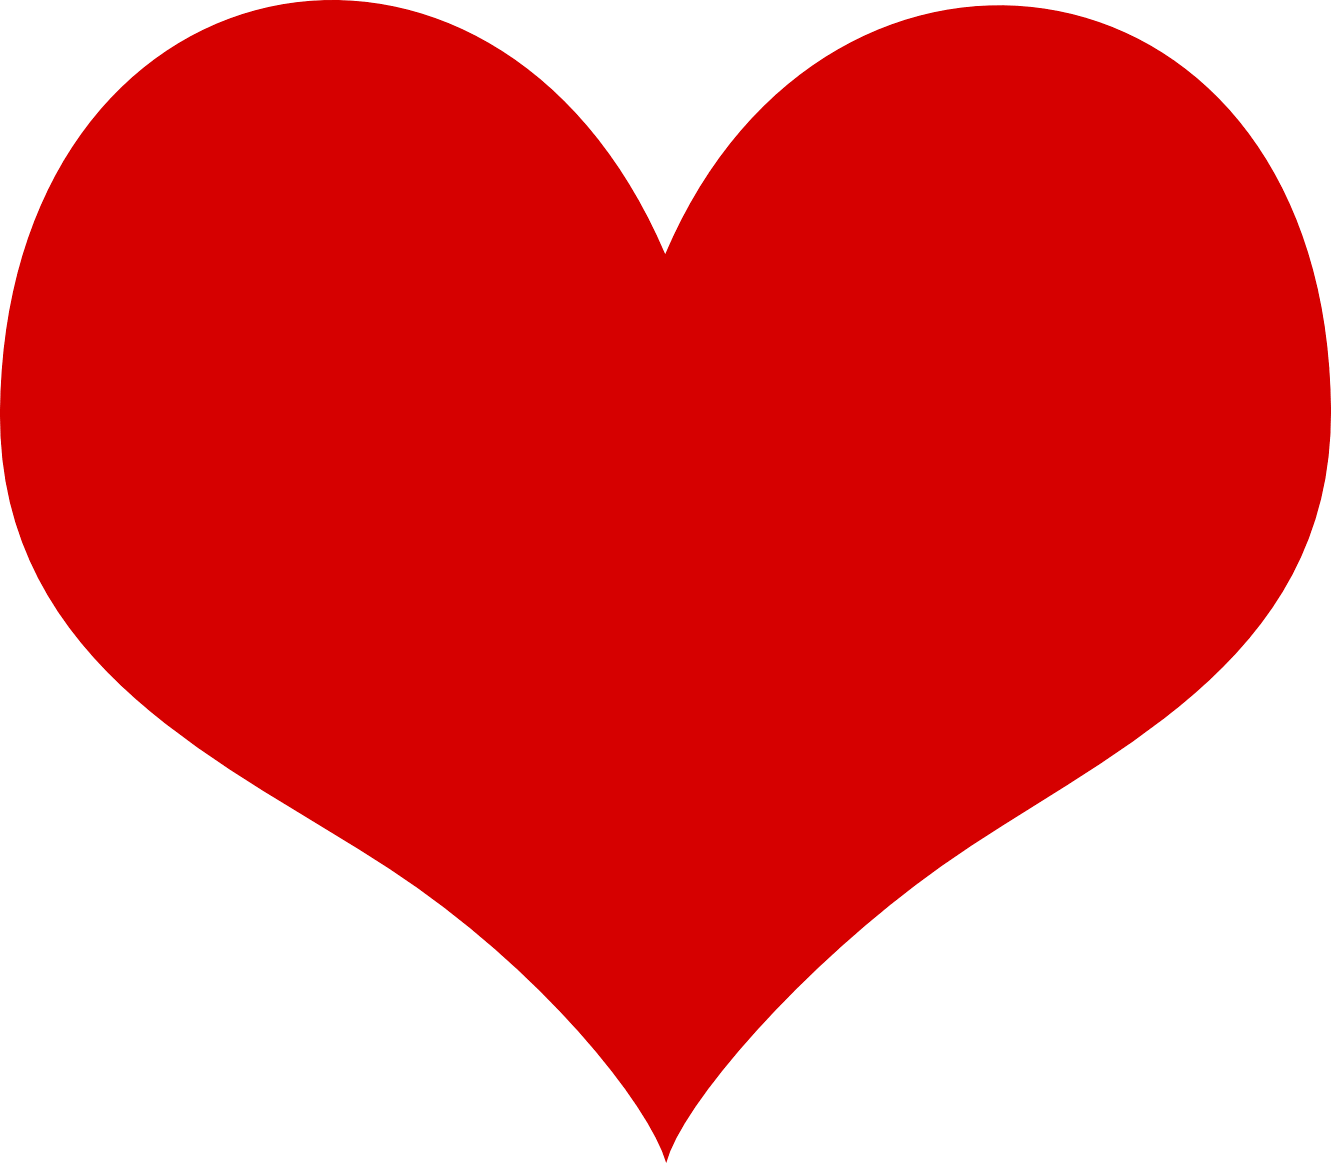 Red Heart Png Image Download PNG Image